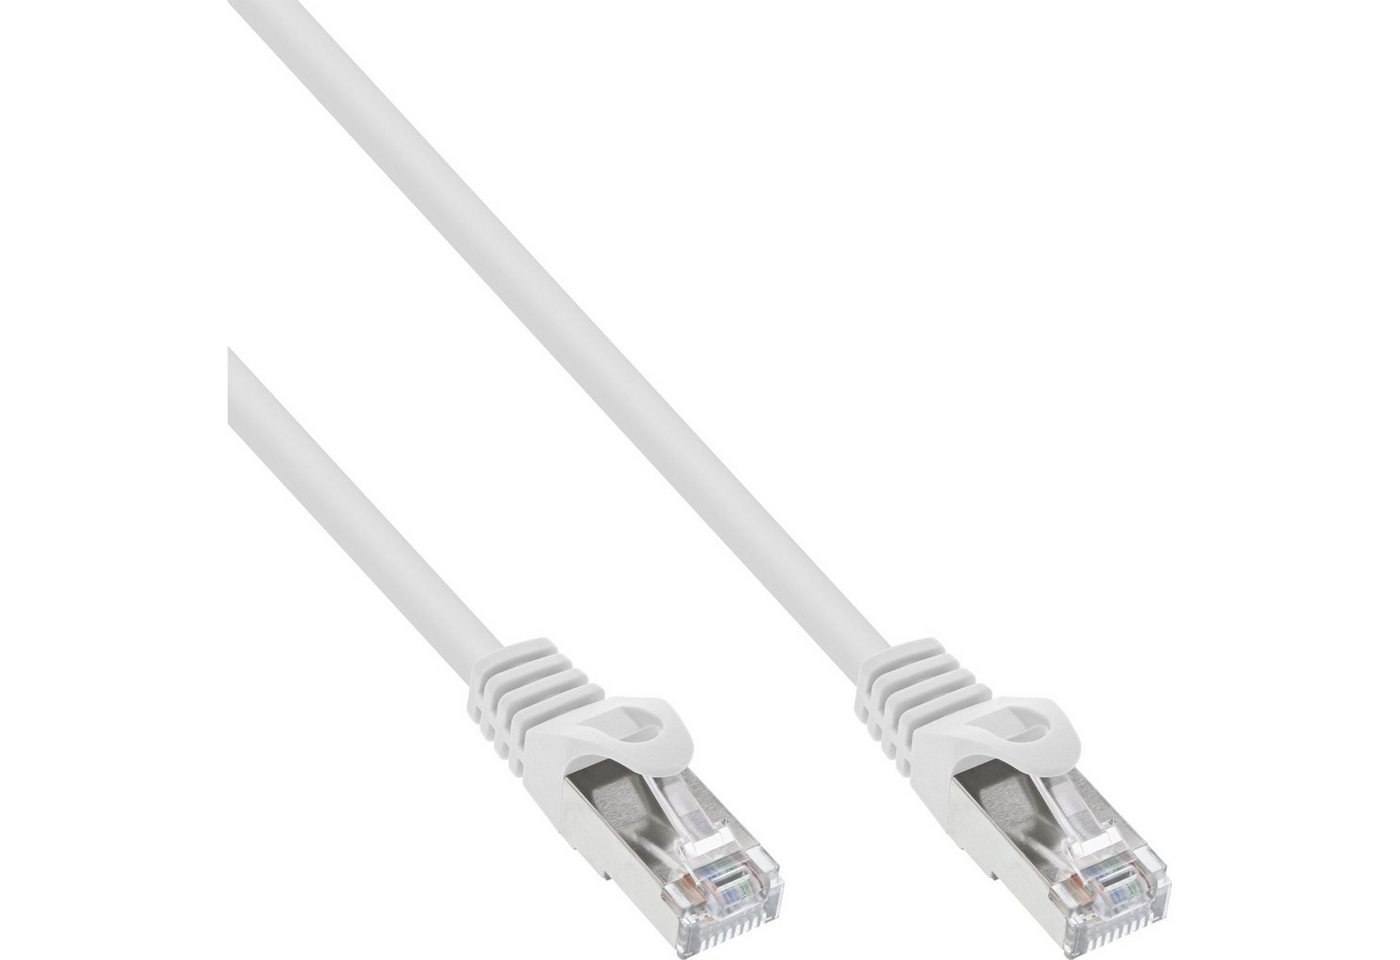 INTOS ELECTRONIC AG InLine® Patchkabel, SF/UTP, Cat.5e, weiß, 3m LAN-Kabel von INTOS ELECTRONIC AG